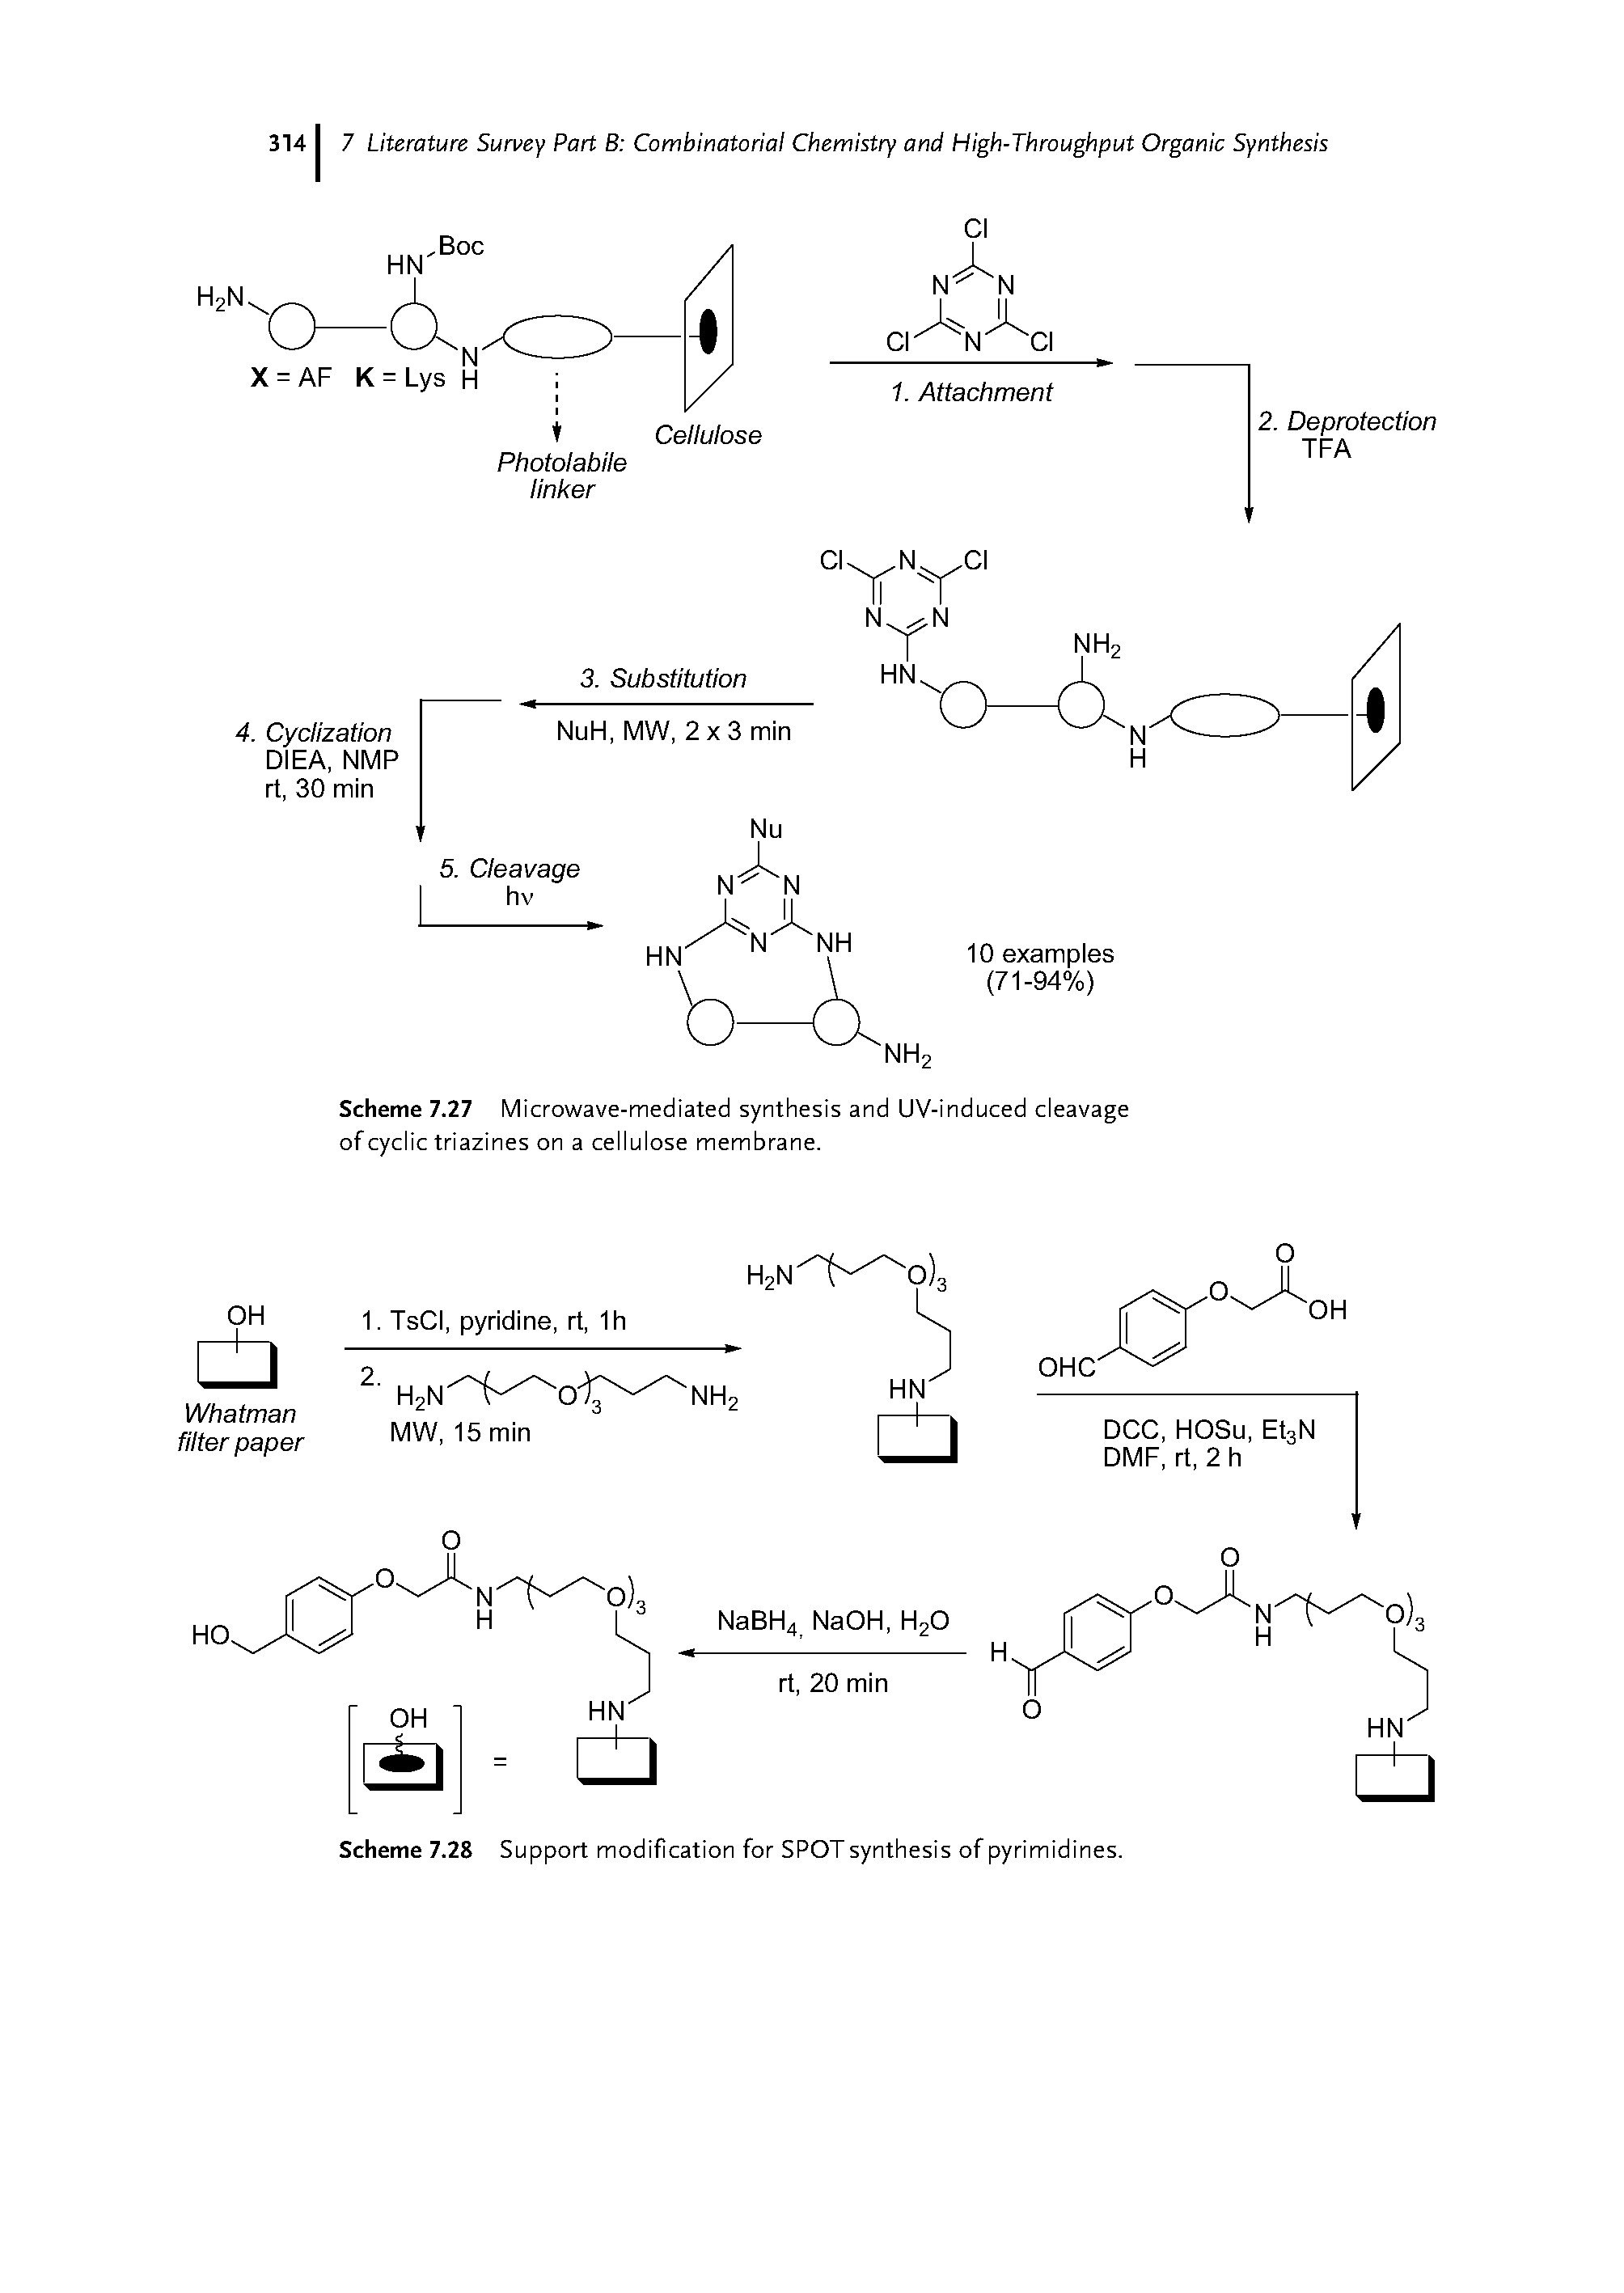 Scheme 7.28 Support modification for SPOT synthesis of pyrimidines.